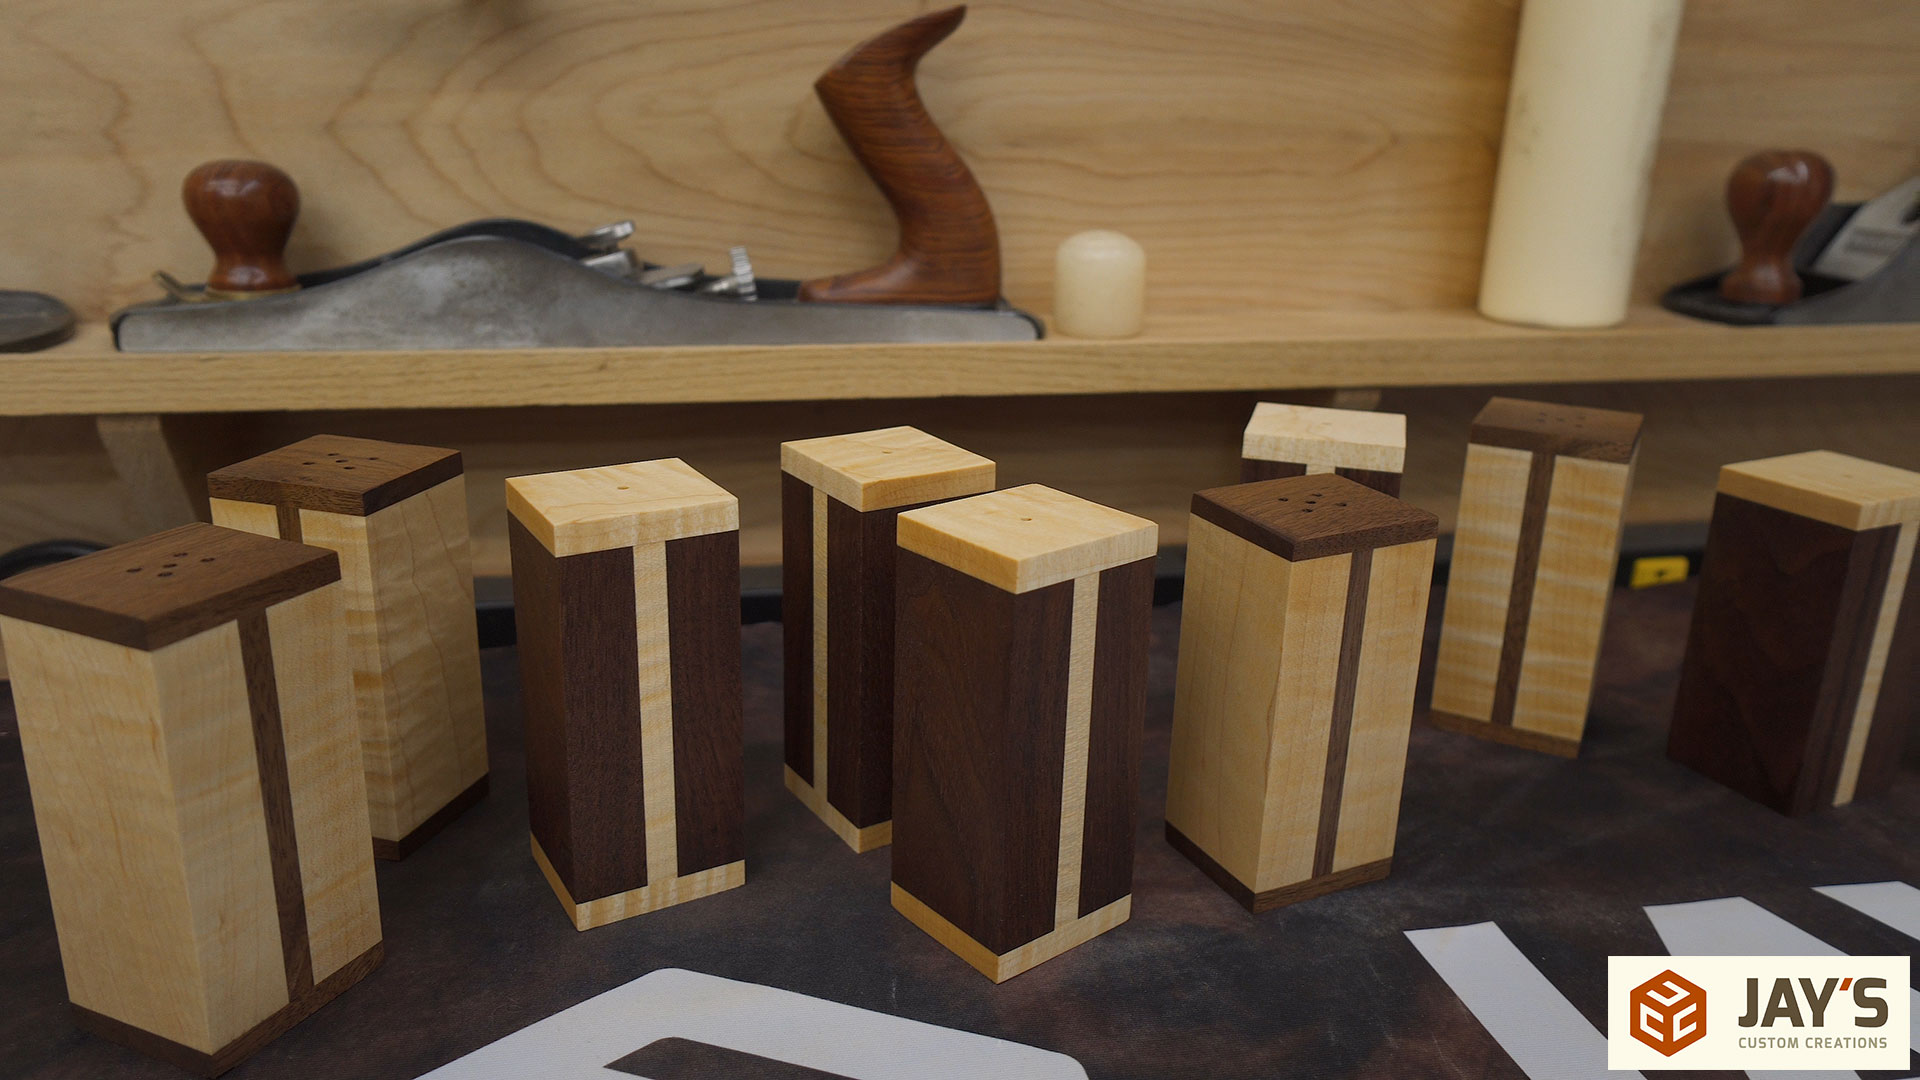 PROJECT: Off-Center Salt and Pepper Shakers - Woodworking, Blog, Videos, Plans